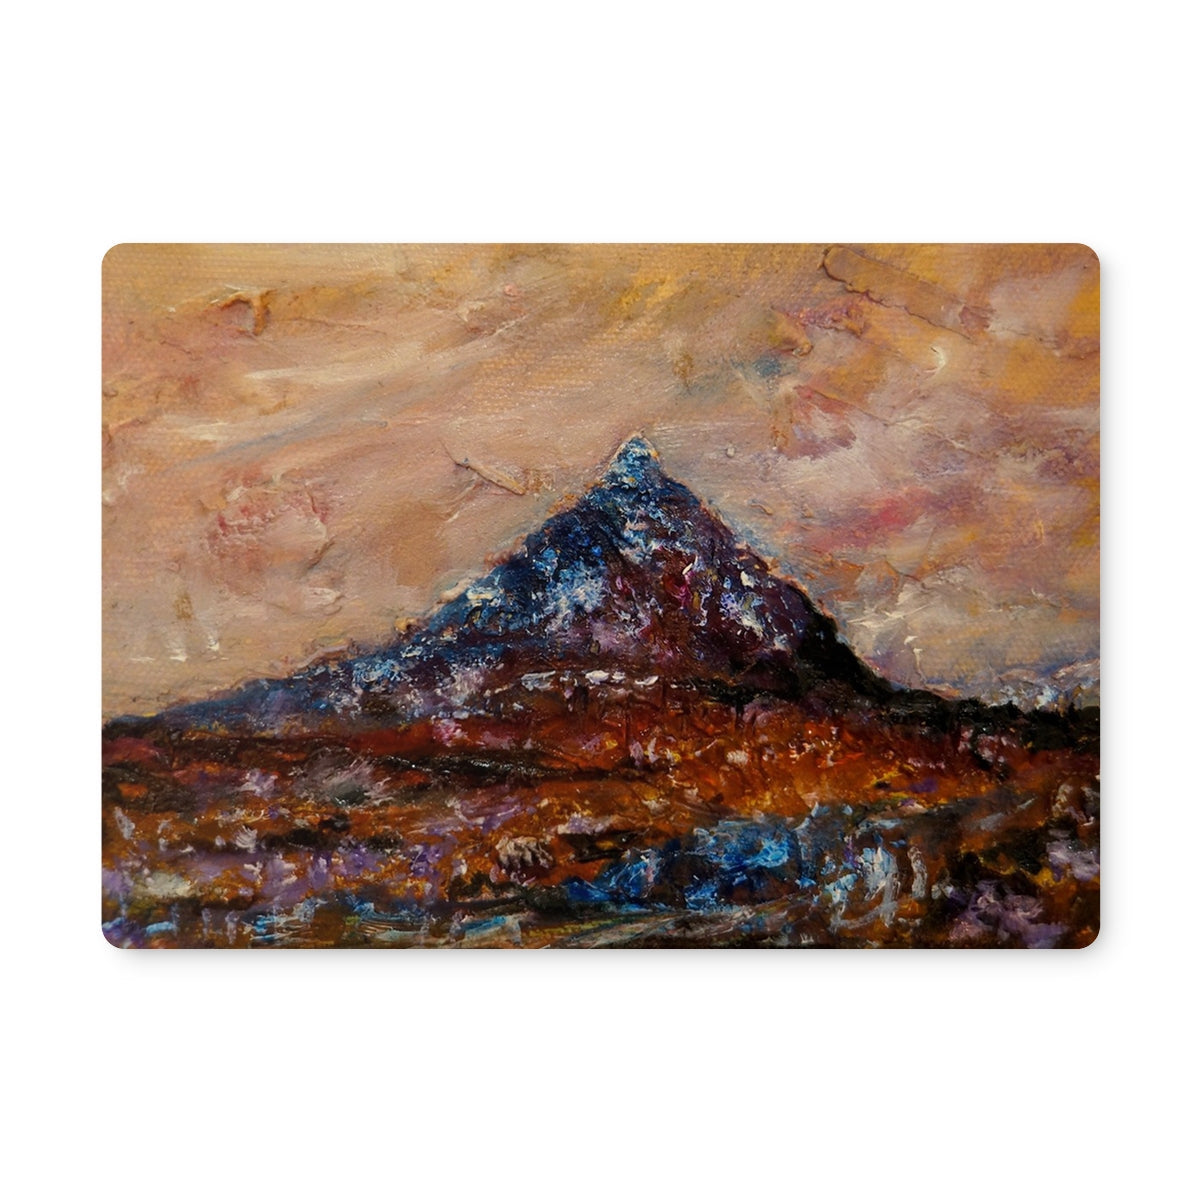 Buachaille Etive Mòr Art Gifts Placemat-Placemats-Glencoe Art Gallery-6 Placemats-Paintings, Prints, Homeware, Art Gifts From Scotland By Scottish Artist Kevin Hunter